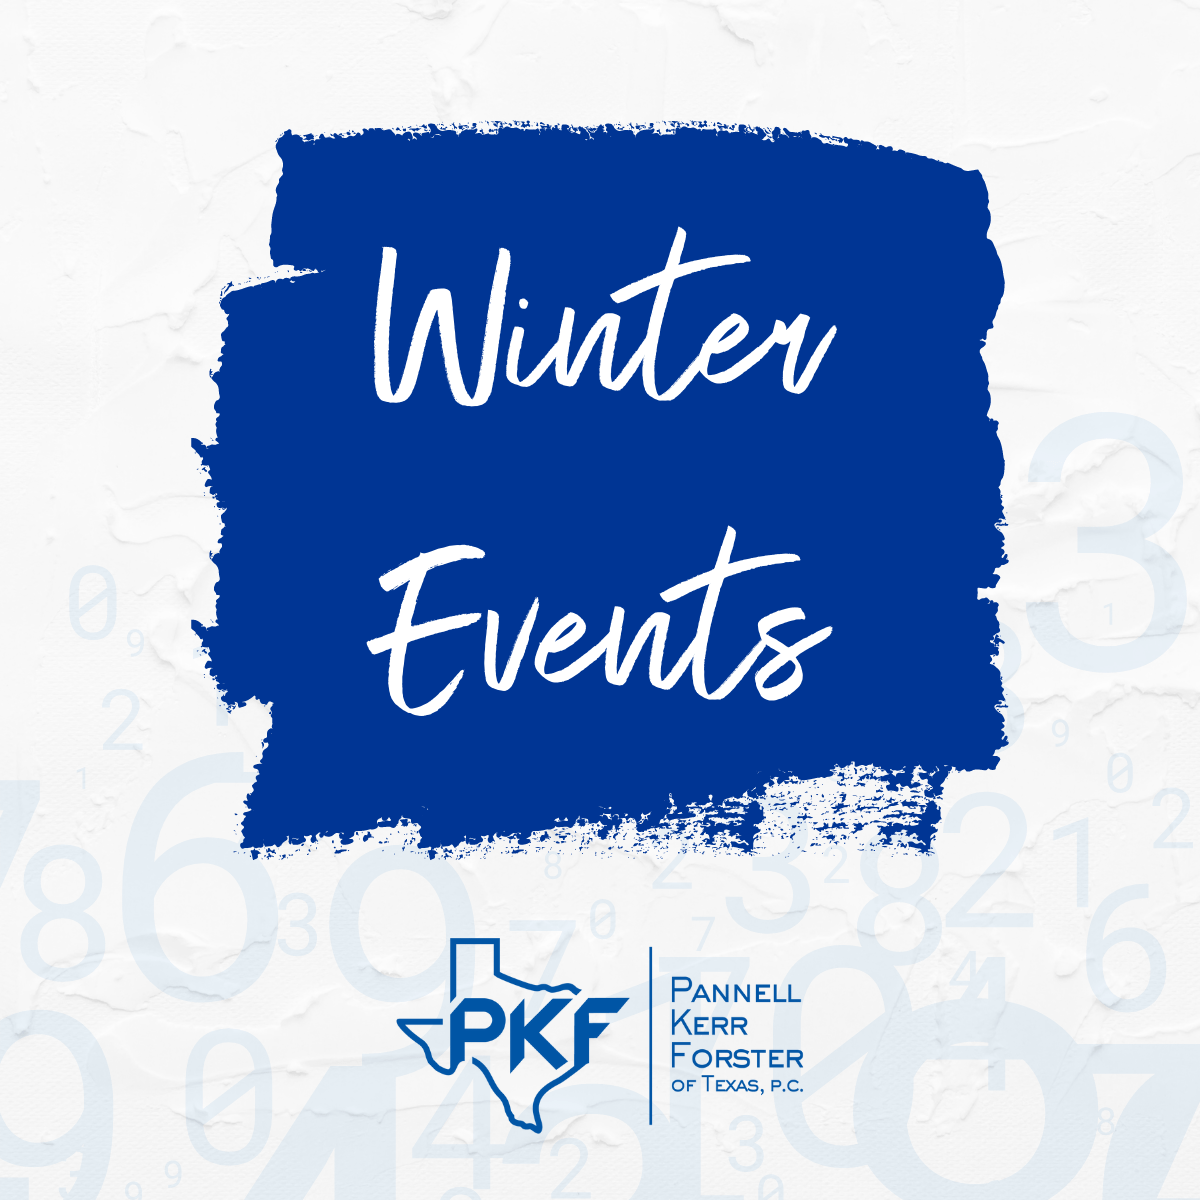 Mark Your Calendars! Upcoming December 2019 Houston Events…